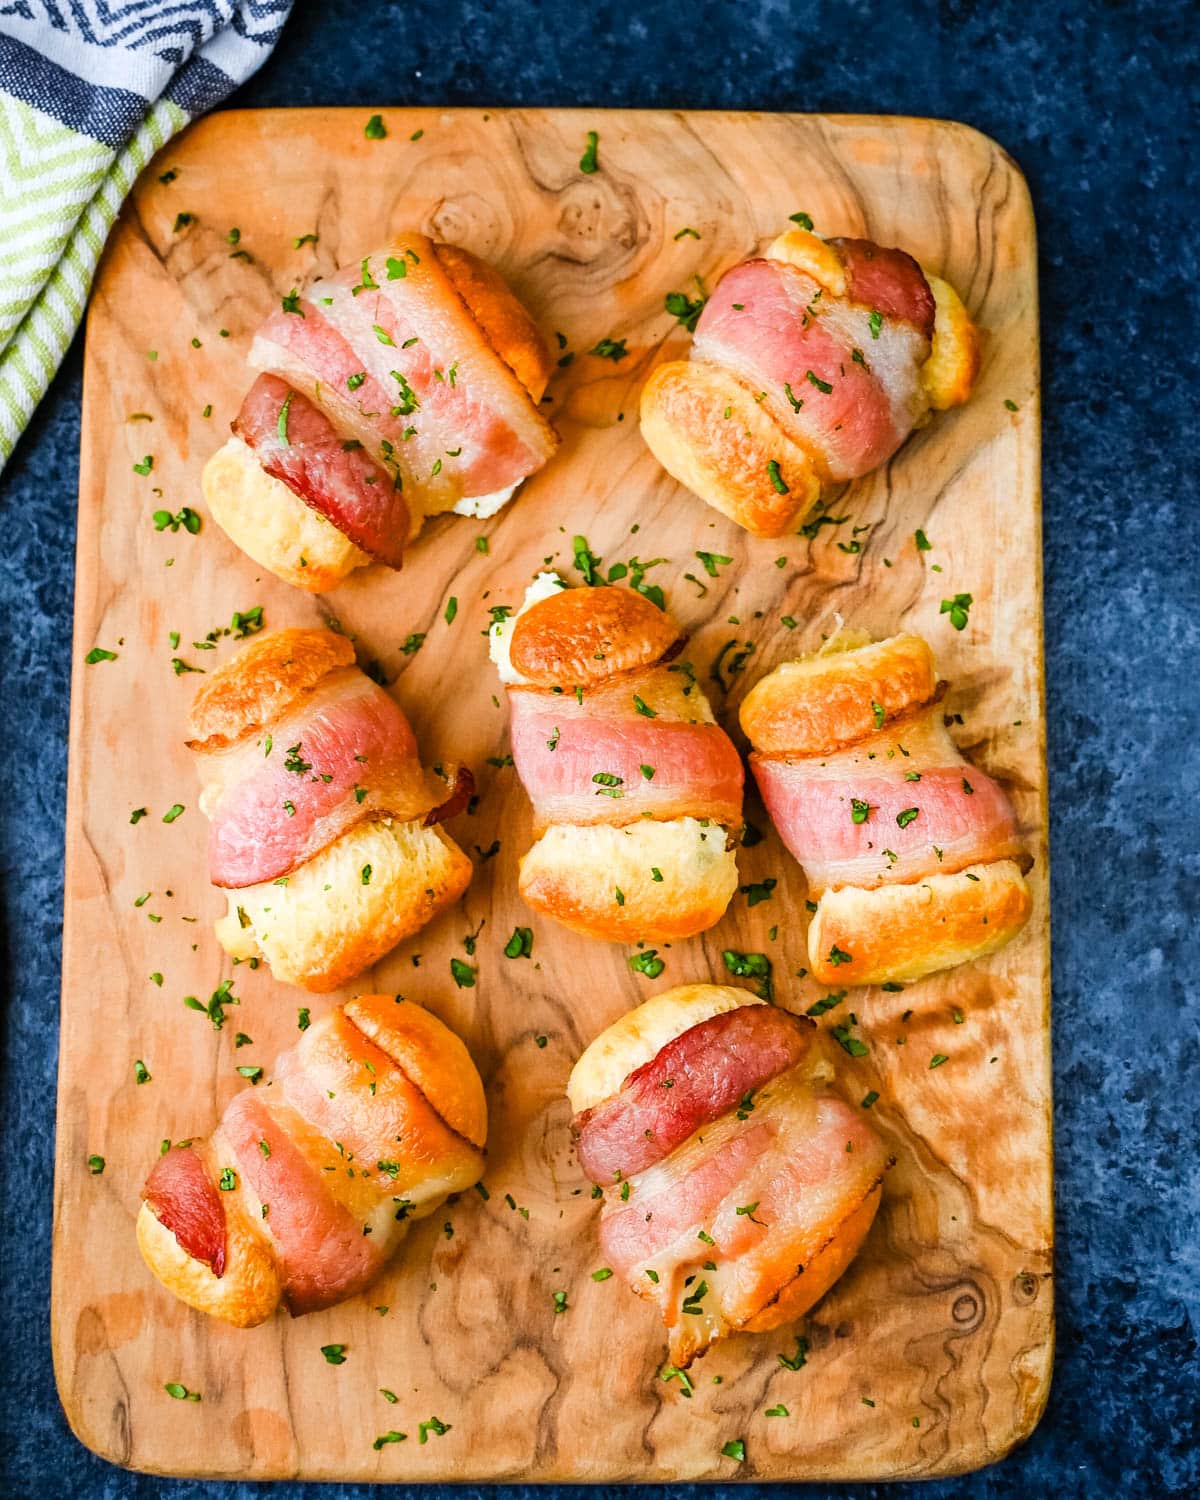 Serving the bacon wrapped crescent rolls.